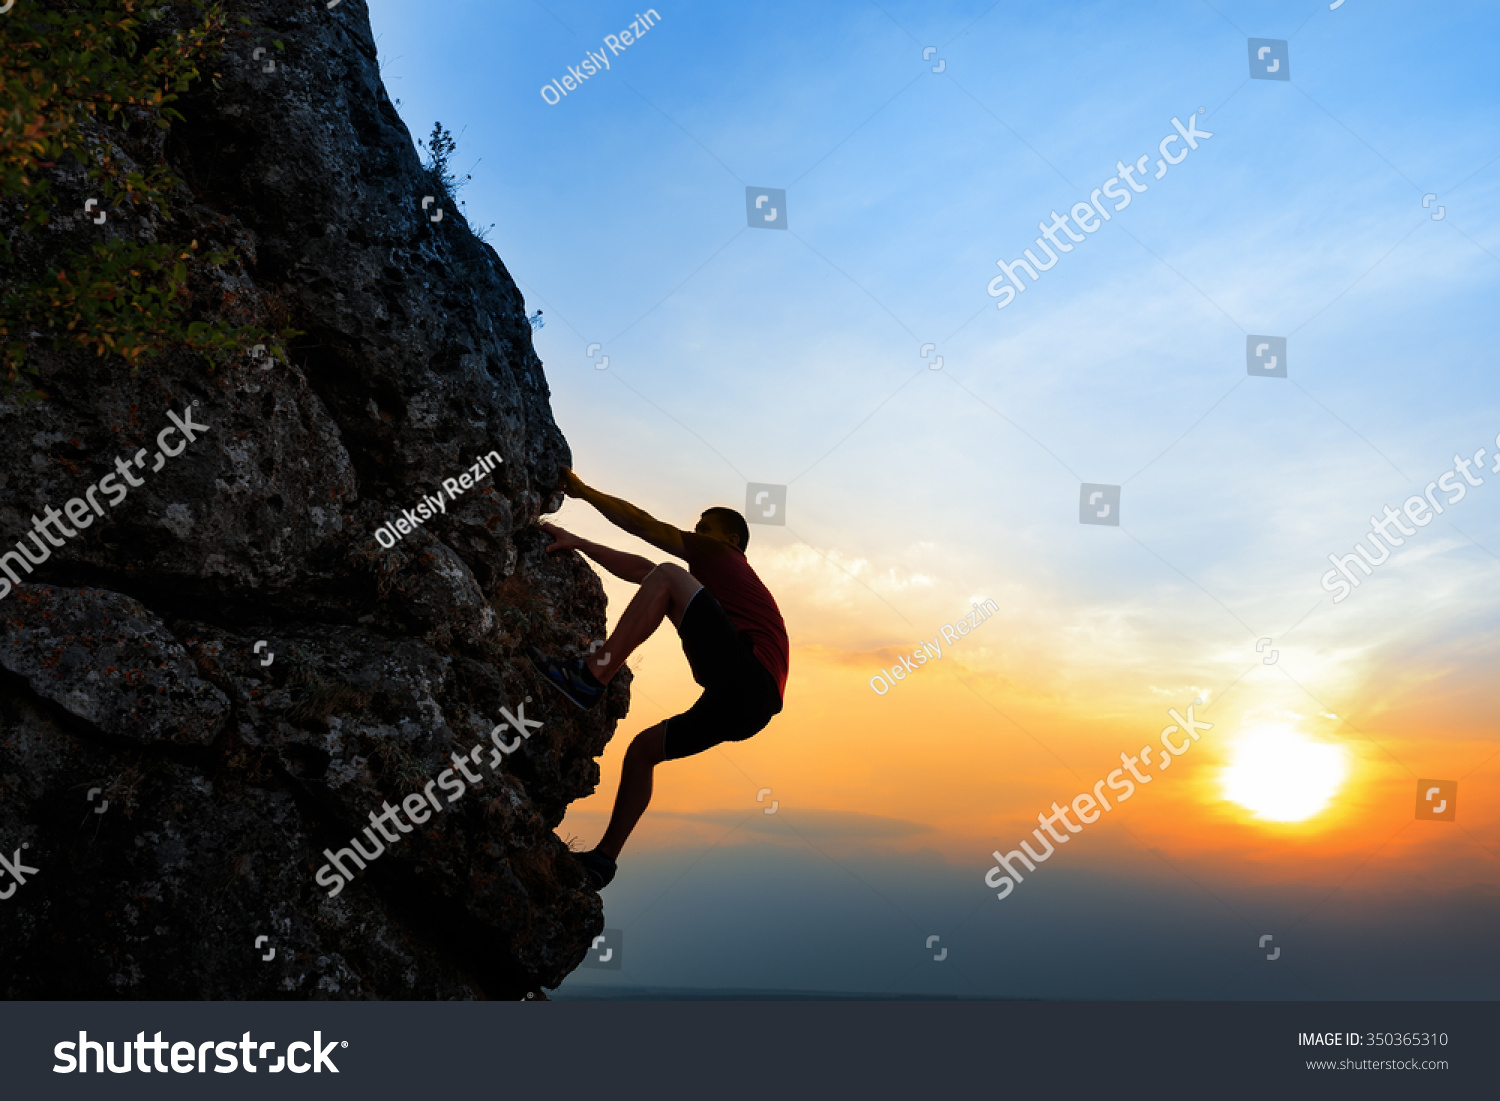 A Silhouette of a Rock climber at sunset background. Sport and active life #350365310